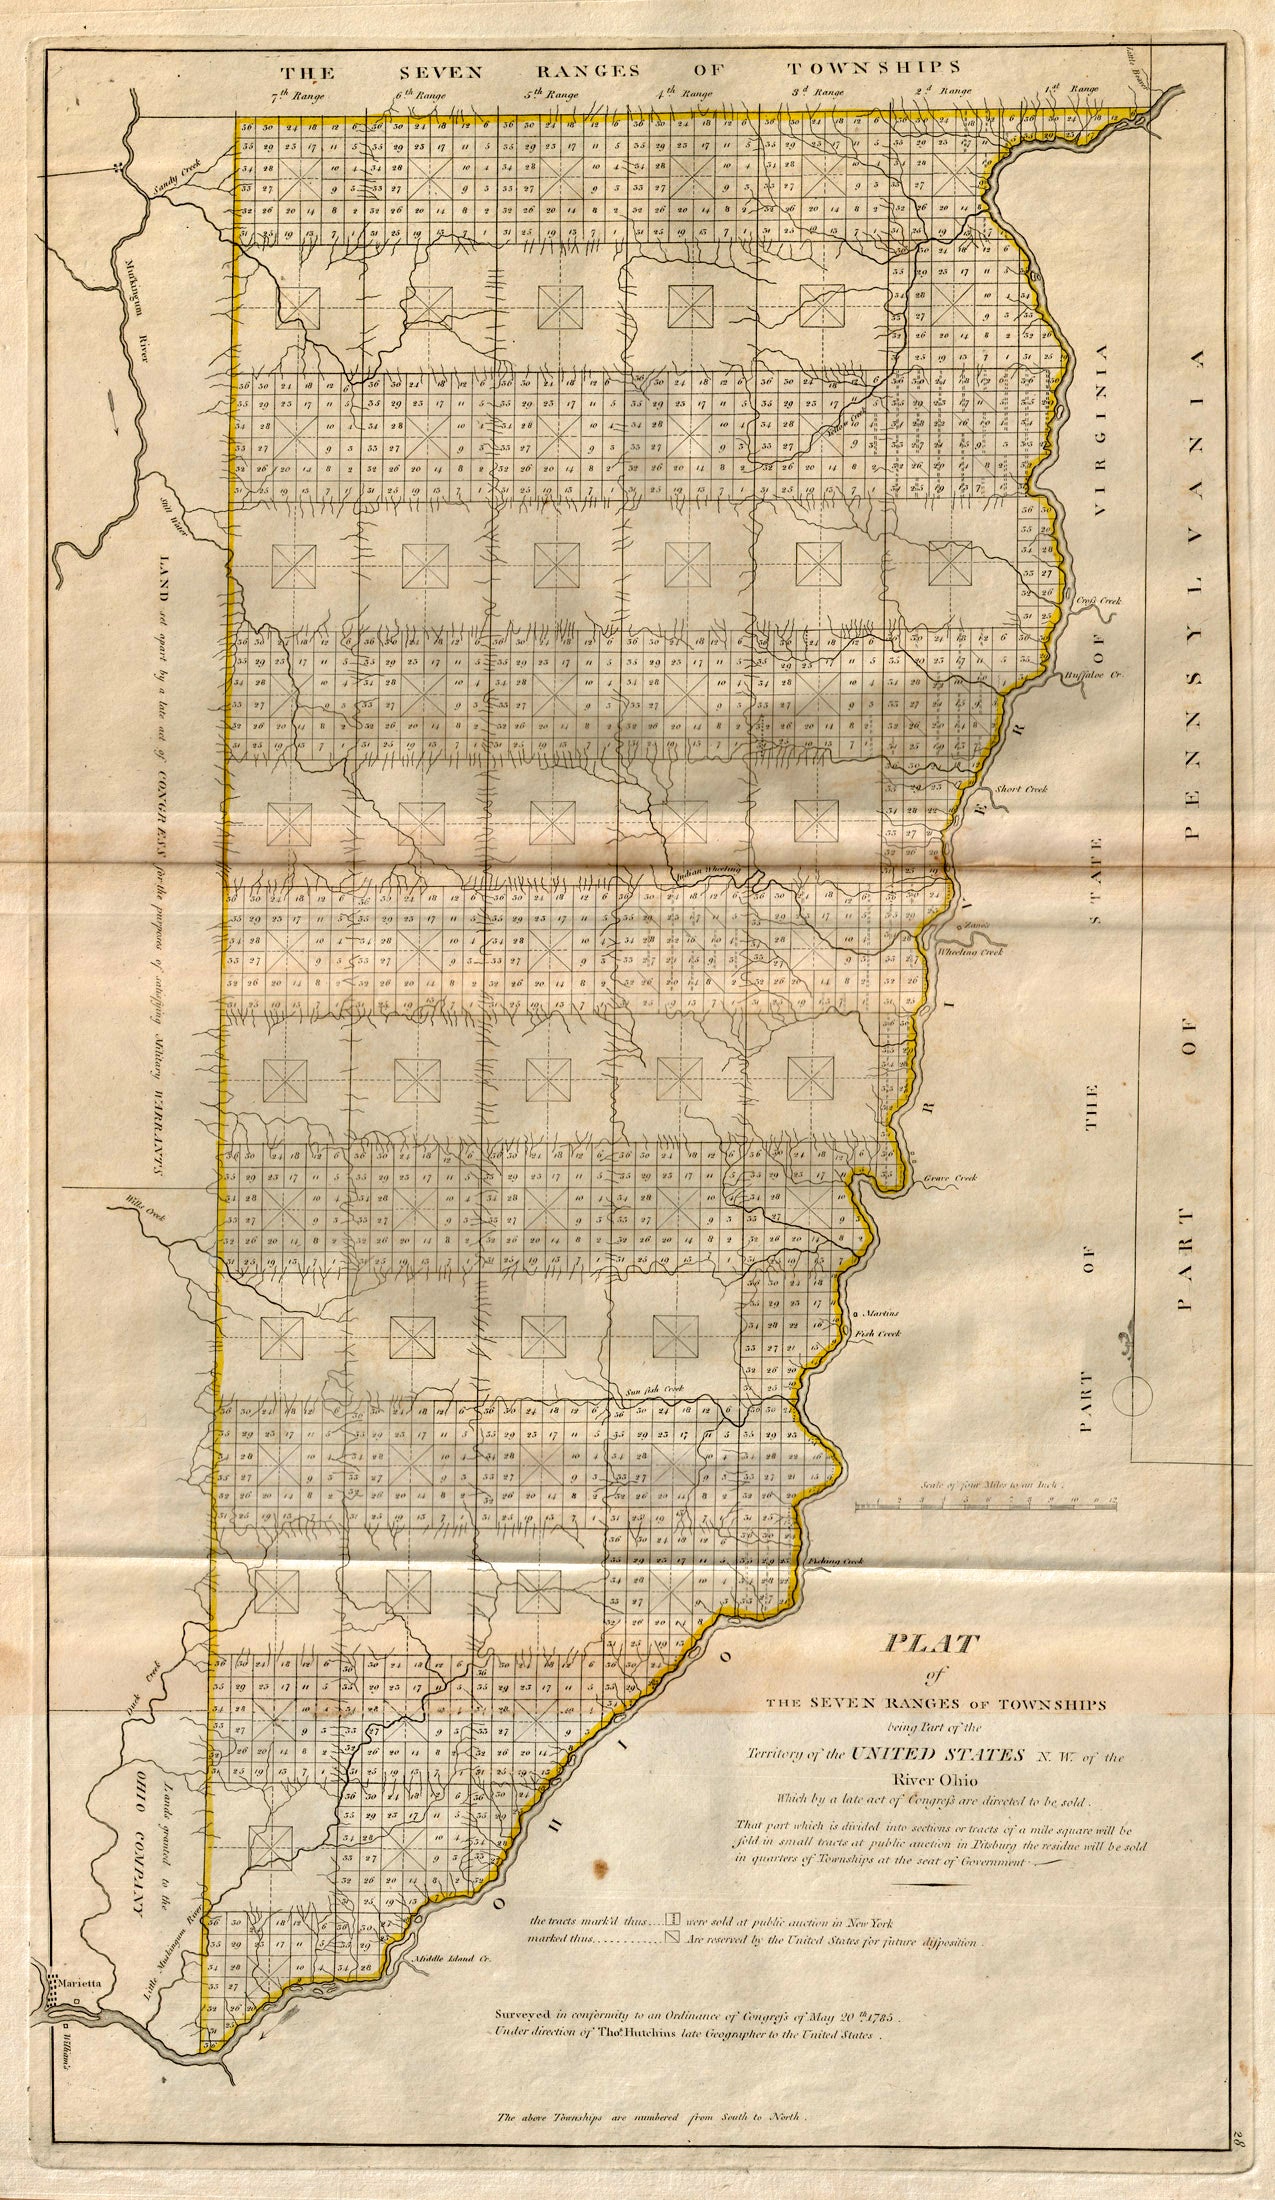 (OH.) Plat of The Seven Ranges Of Townships being Part of the Territory of the United States...